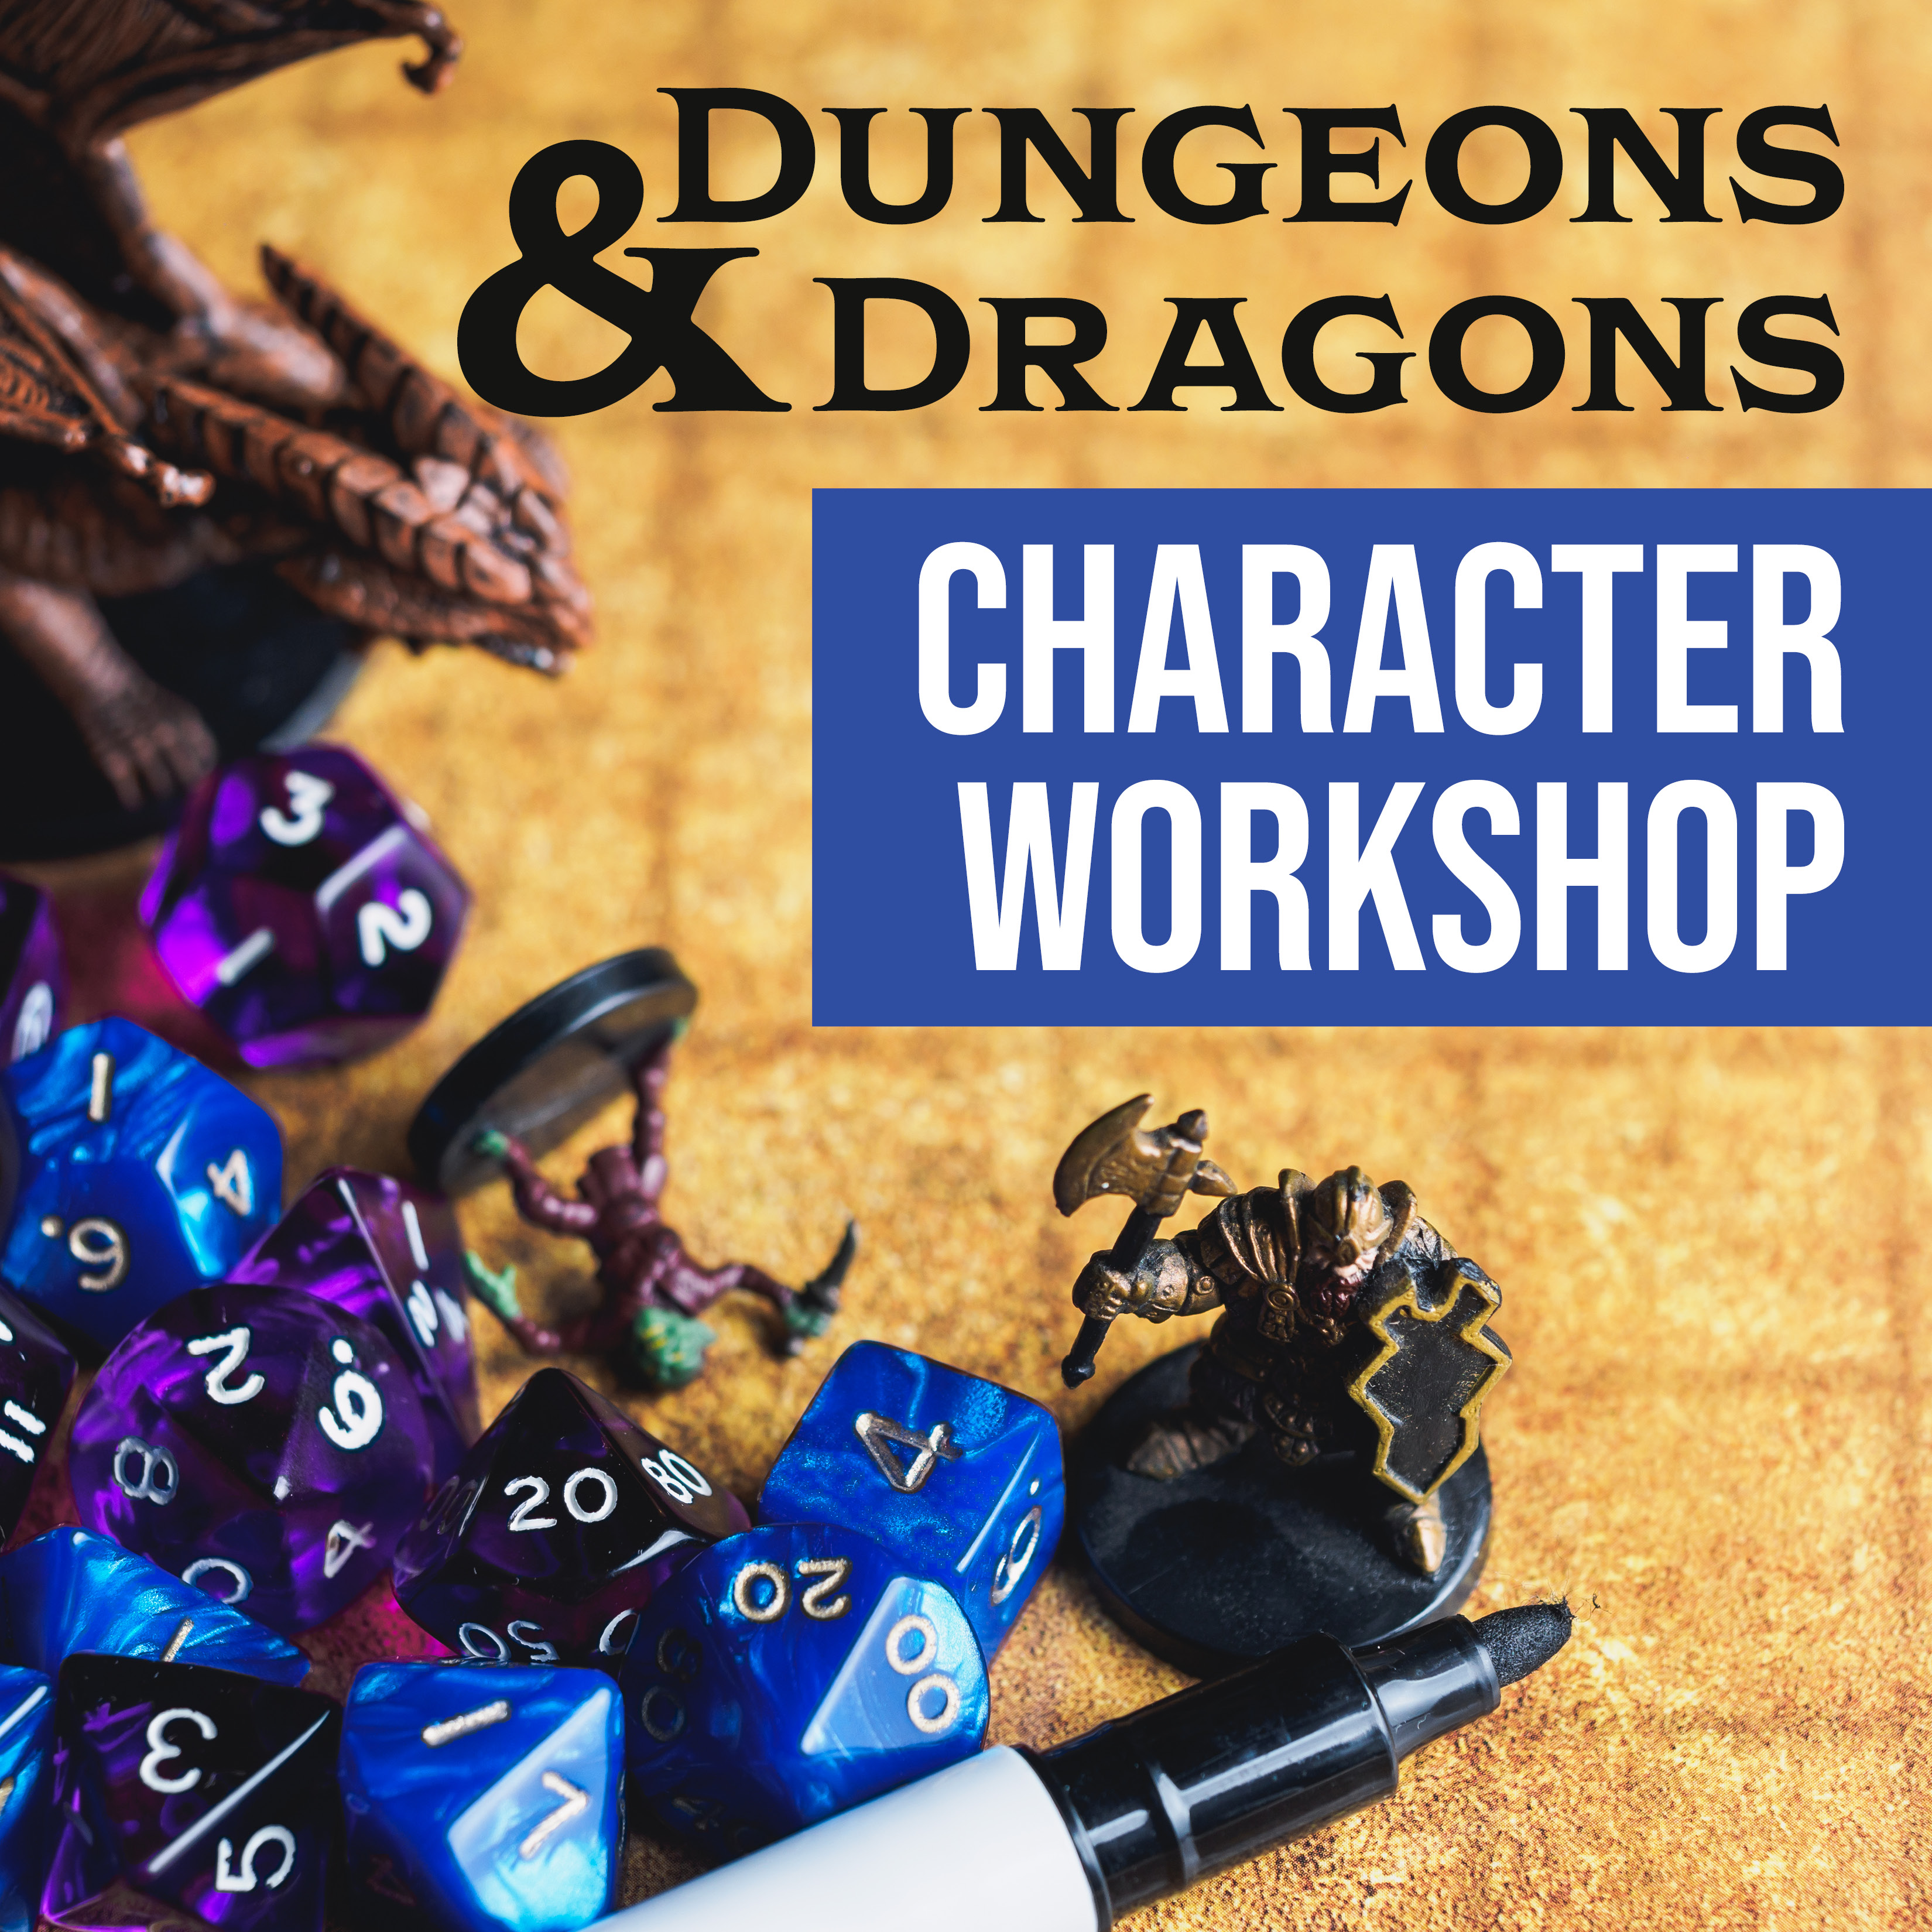 Dungeons and Dragons Character Workshop